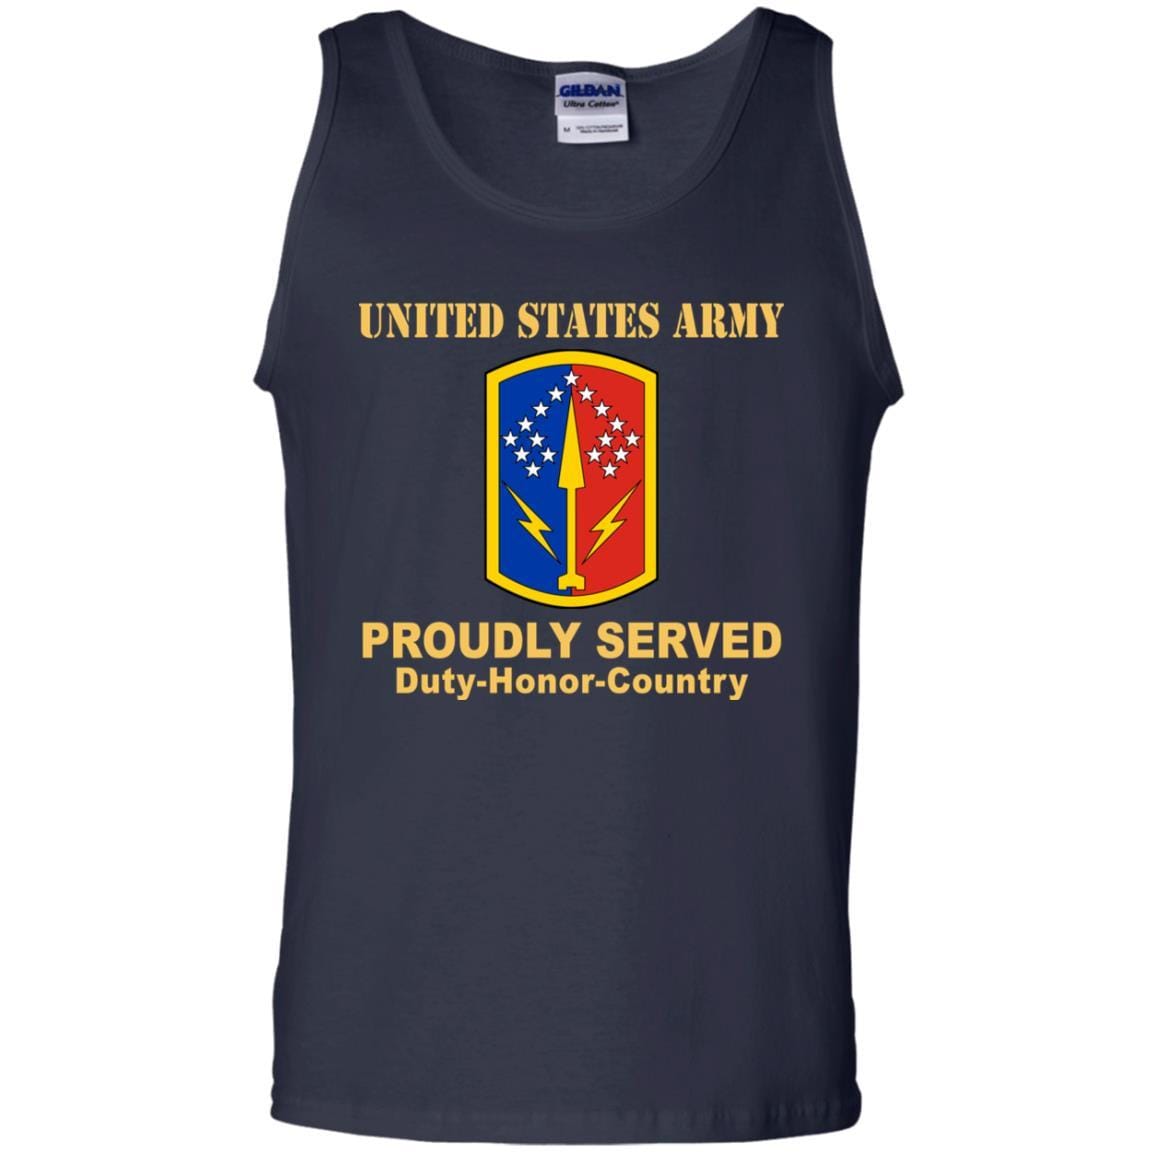 US ARMY 174 AIR DEFENSE ARTILLERY BRIGADE - Proudly Served T-Shirt On Front For Men-TShirt-Army-Veterans Nation